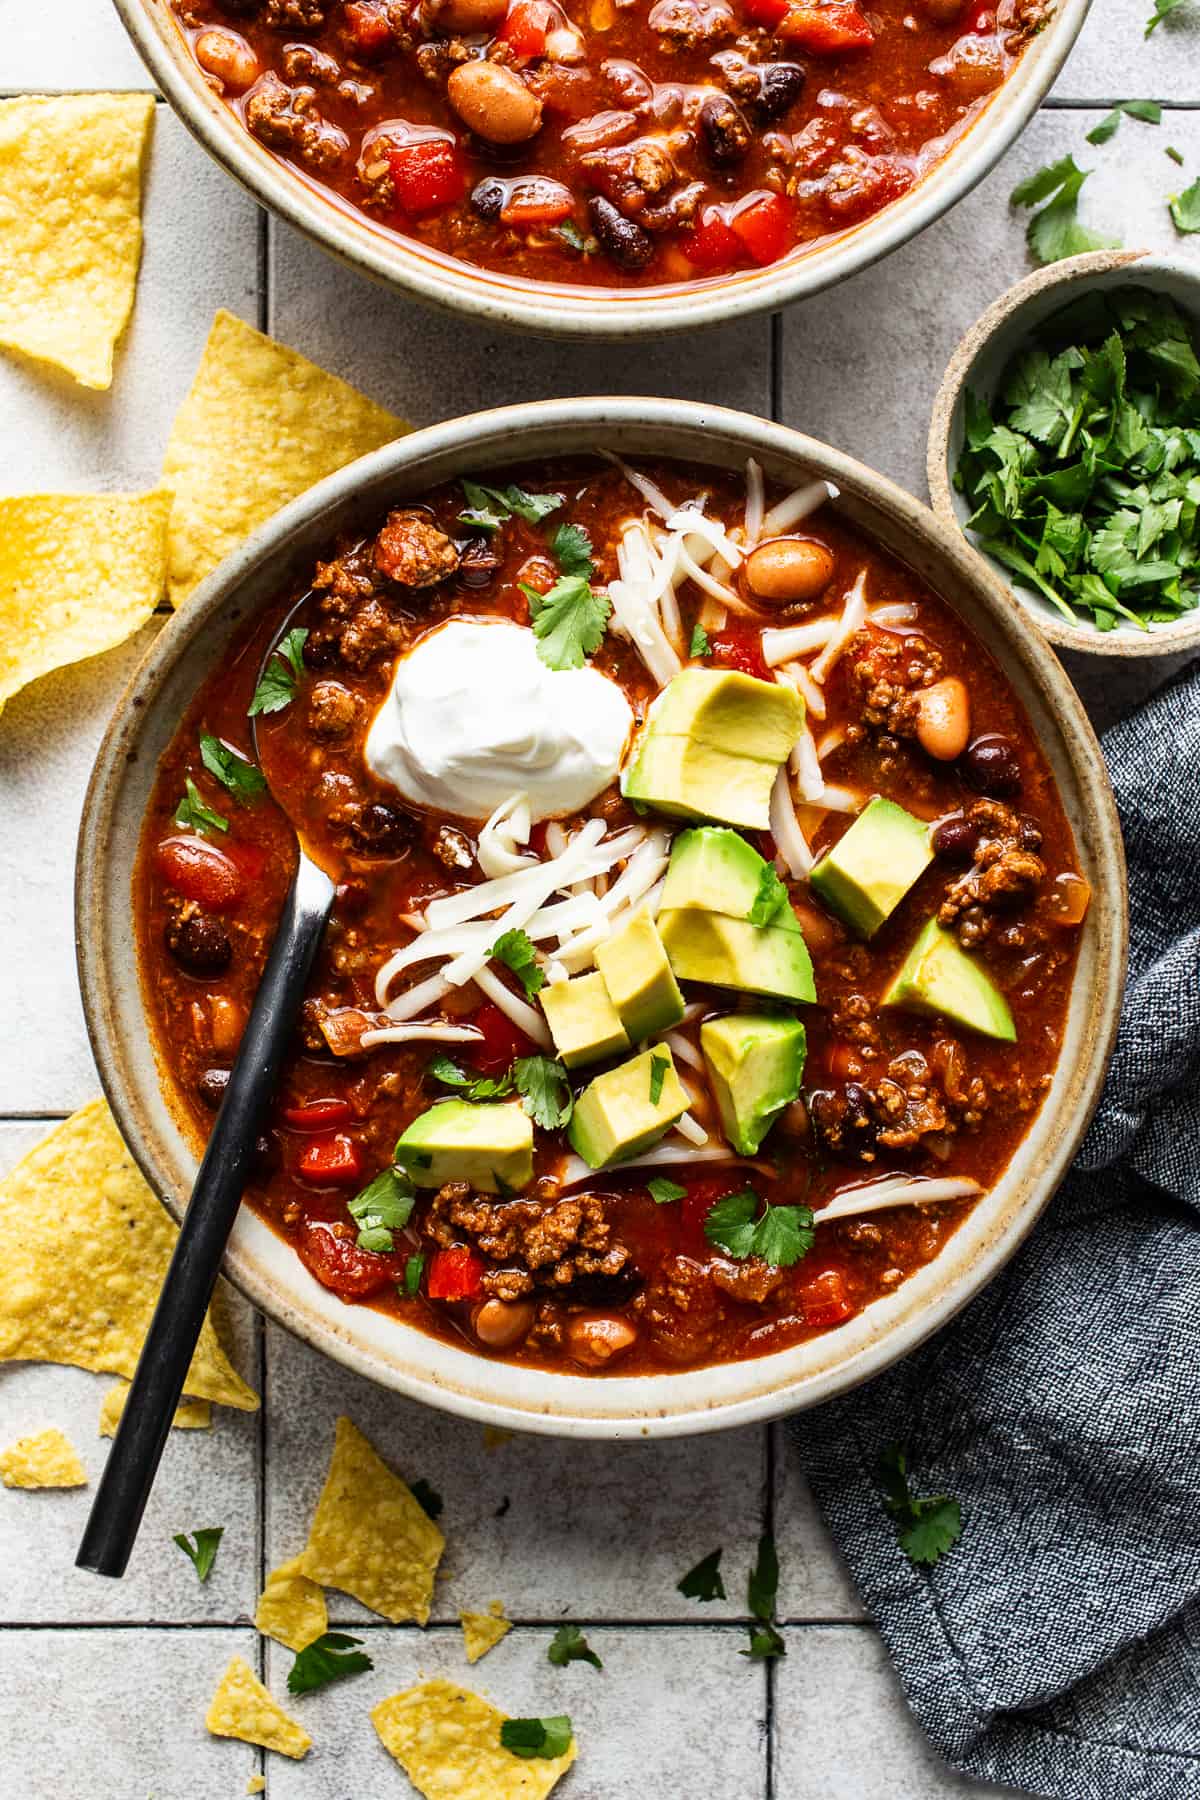 Chorizo chili in a bowl topped with shredded cheese, avocado, sour cream, and served with tortilla chips.